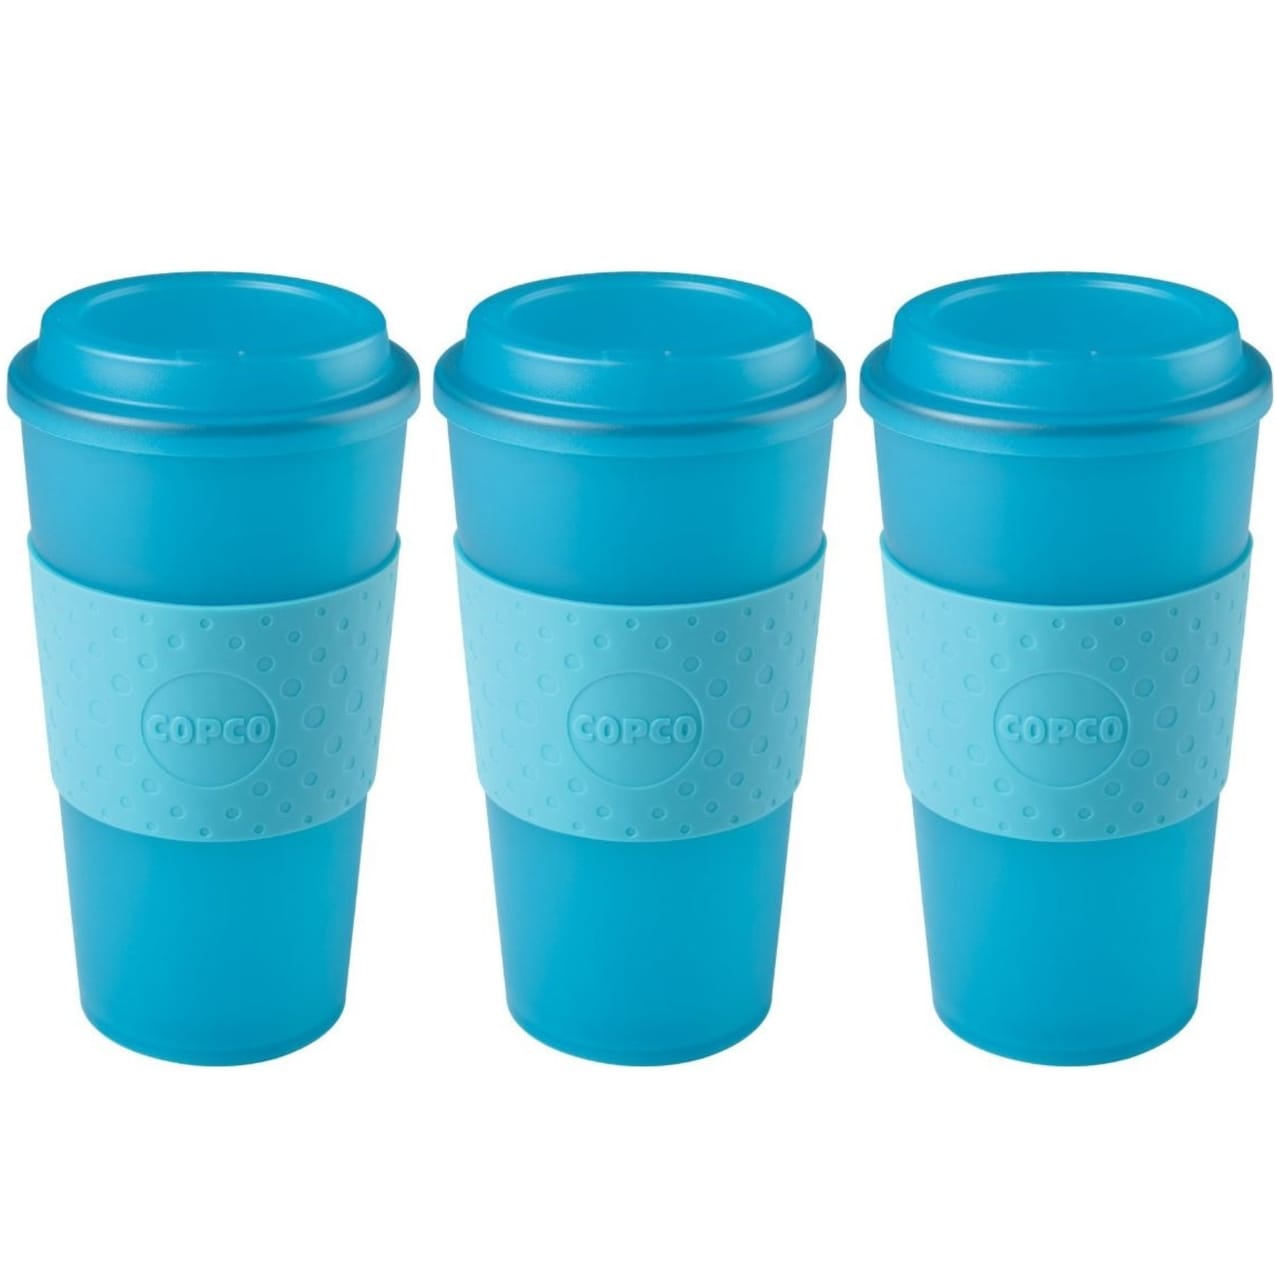 https://ak1.ostkcdn.com/images/products/is/images/direct/7b6764ee1a151309d1e9dc1848070bedac565dc8/Copco-Acadia-Travel-Mug-With-Non-Slip-Sleeve-Double-Wall-Insulation-BPA-Free-16-Oz-Pack-Of-3---Translucent-Teal.jpg